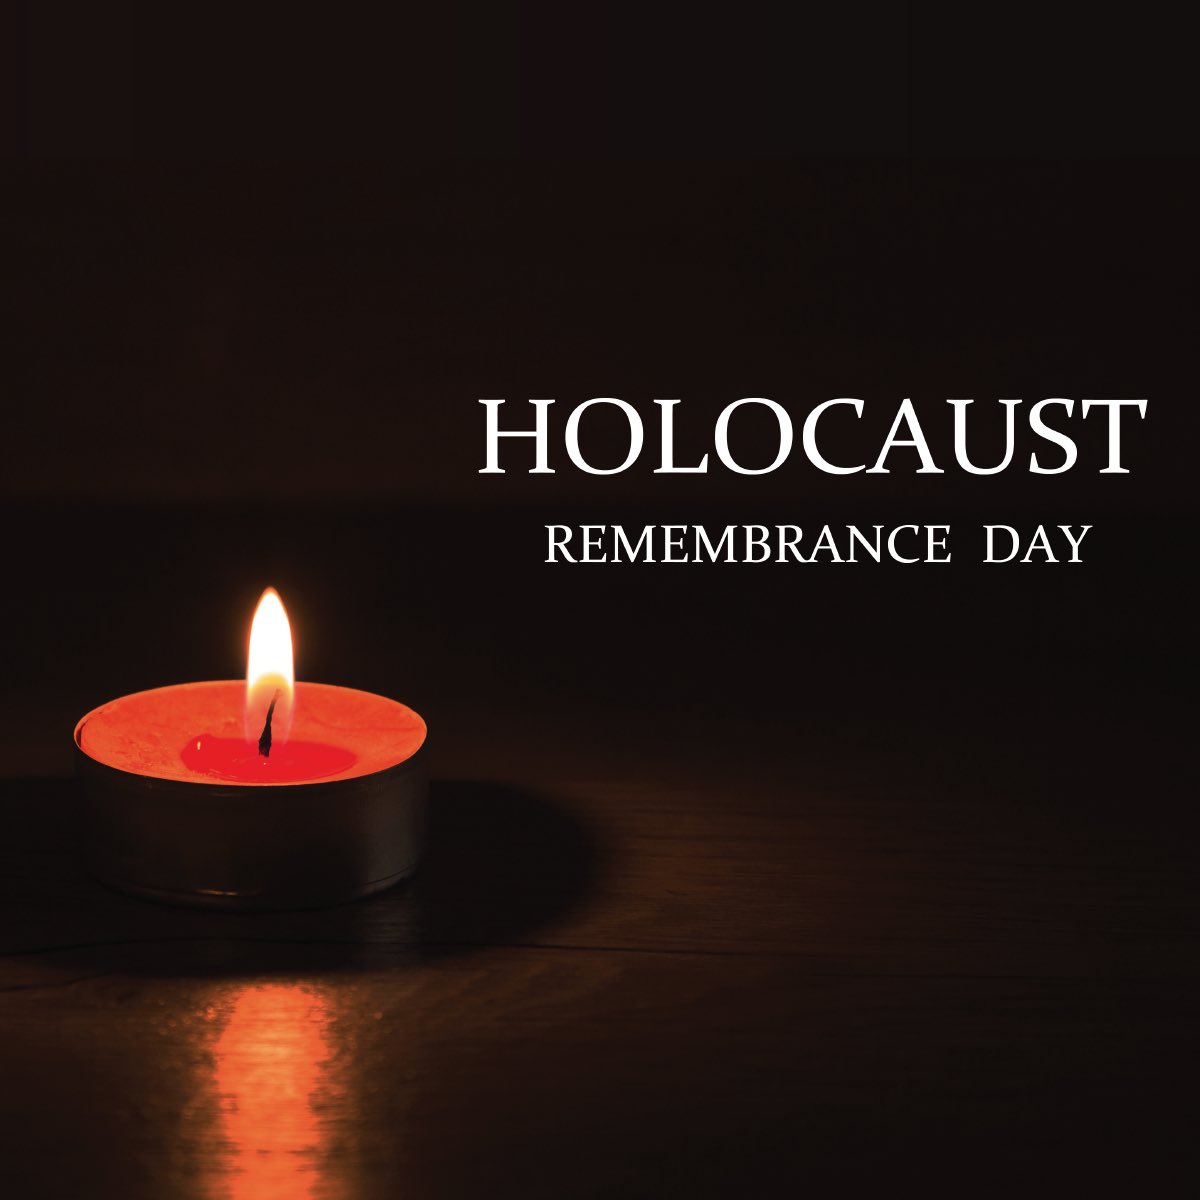 Today, we remember the millions of Jewish lives lost during the horrors of the Holocaust. We must honor the victims, learn from the past, and ensure that this never happens again.